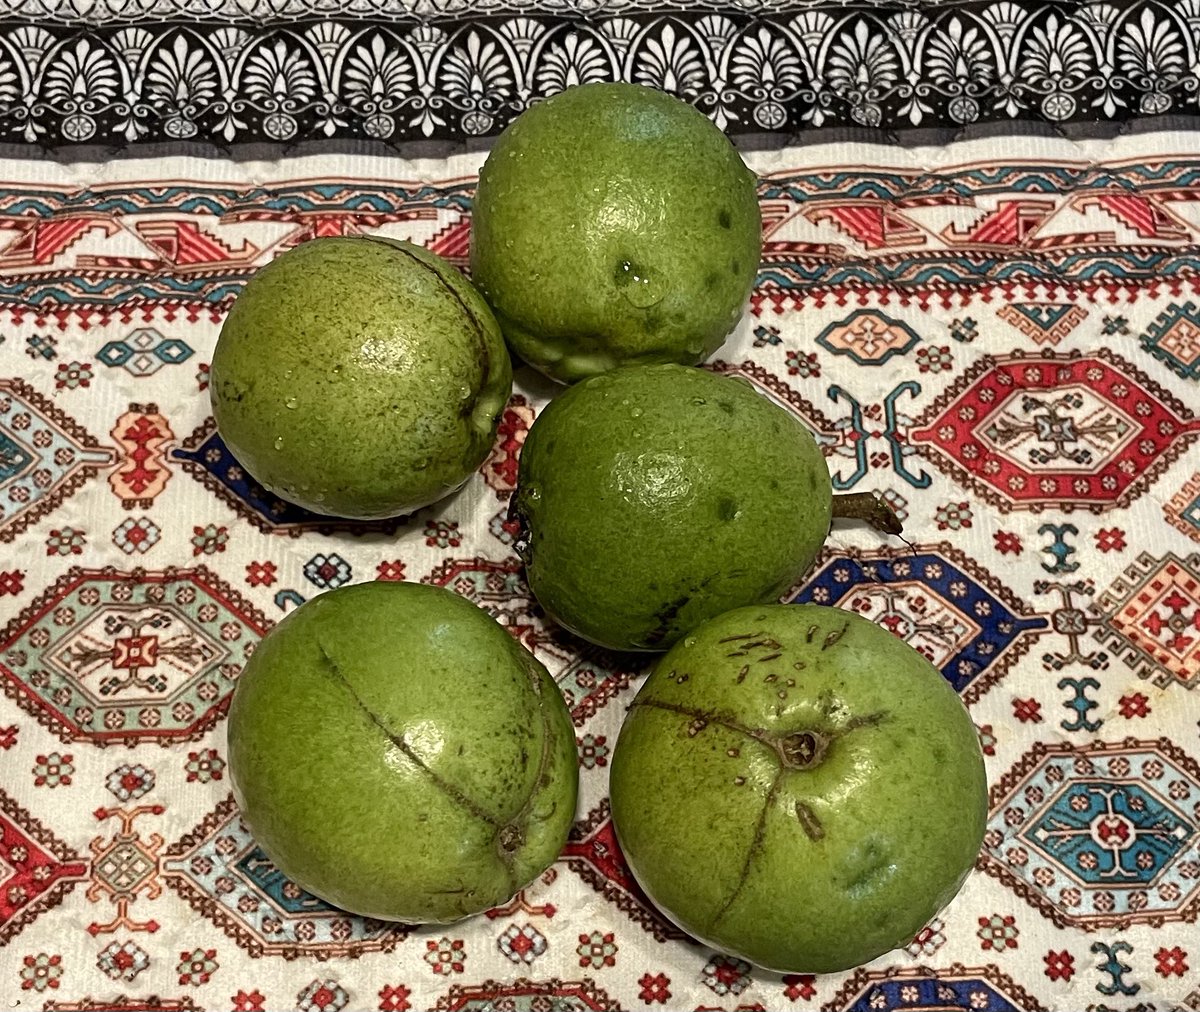 Today's harvest❤️: Organic Guava Thanks to the untimely rains 🌧️, nature's timing ⏱️ is perfect. 🤩 Unexpected blessings 🙏 from the sky! #MyGardenMyLife 🌿🍈